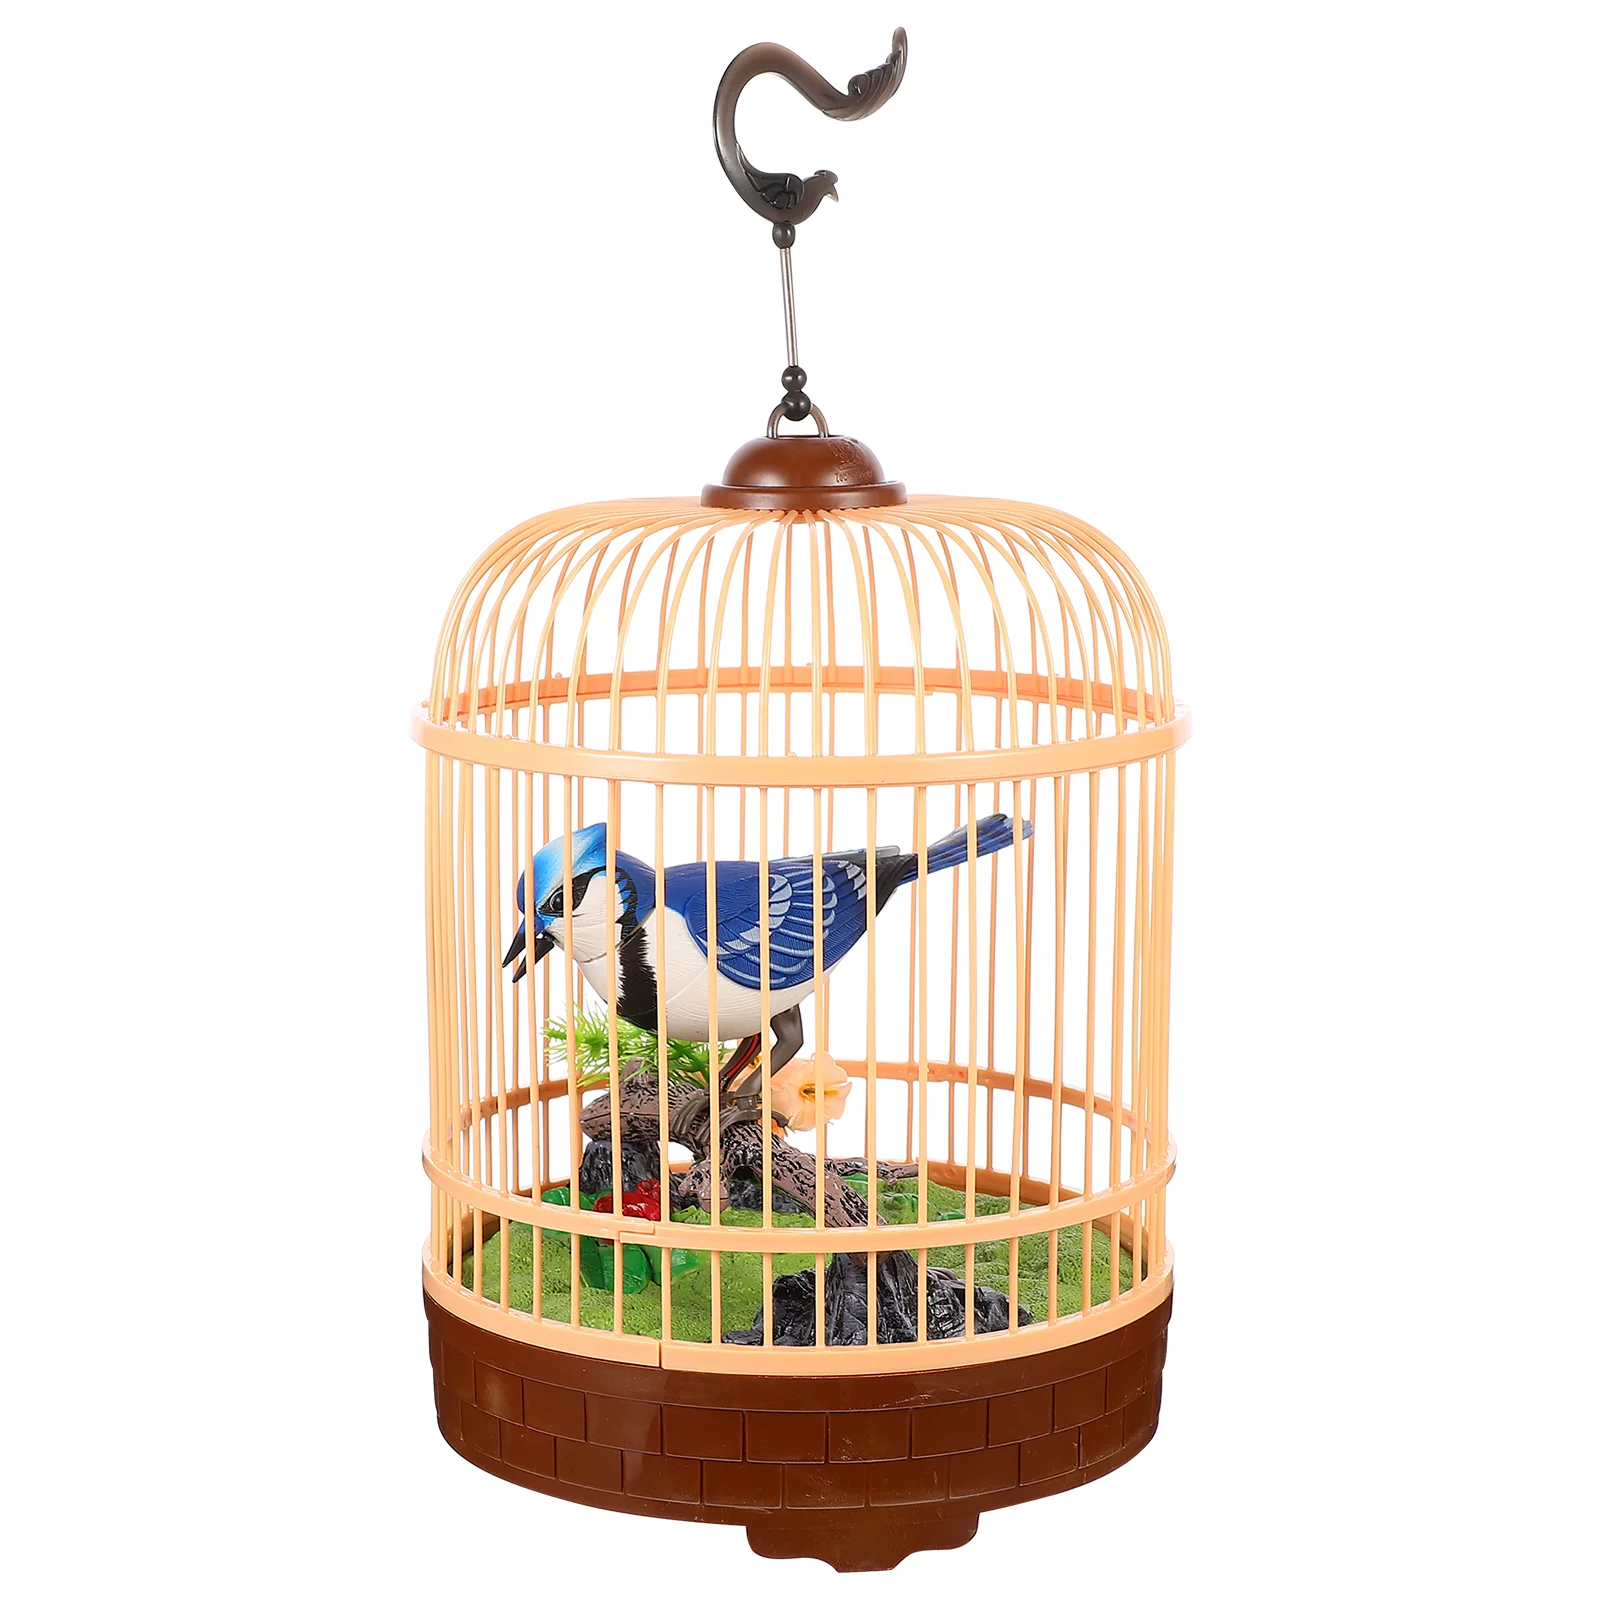 

Toys Bird Parrot Toy Singing Cage Birds Educational Figures Funny Leanrning Early Whistling Interactive Electronic Decoration